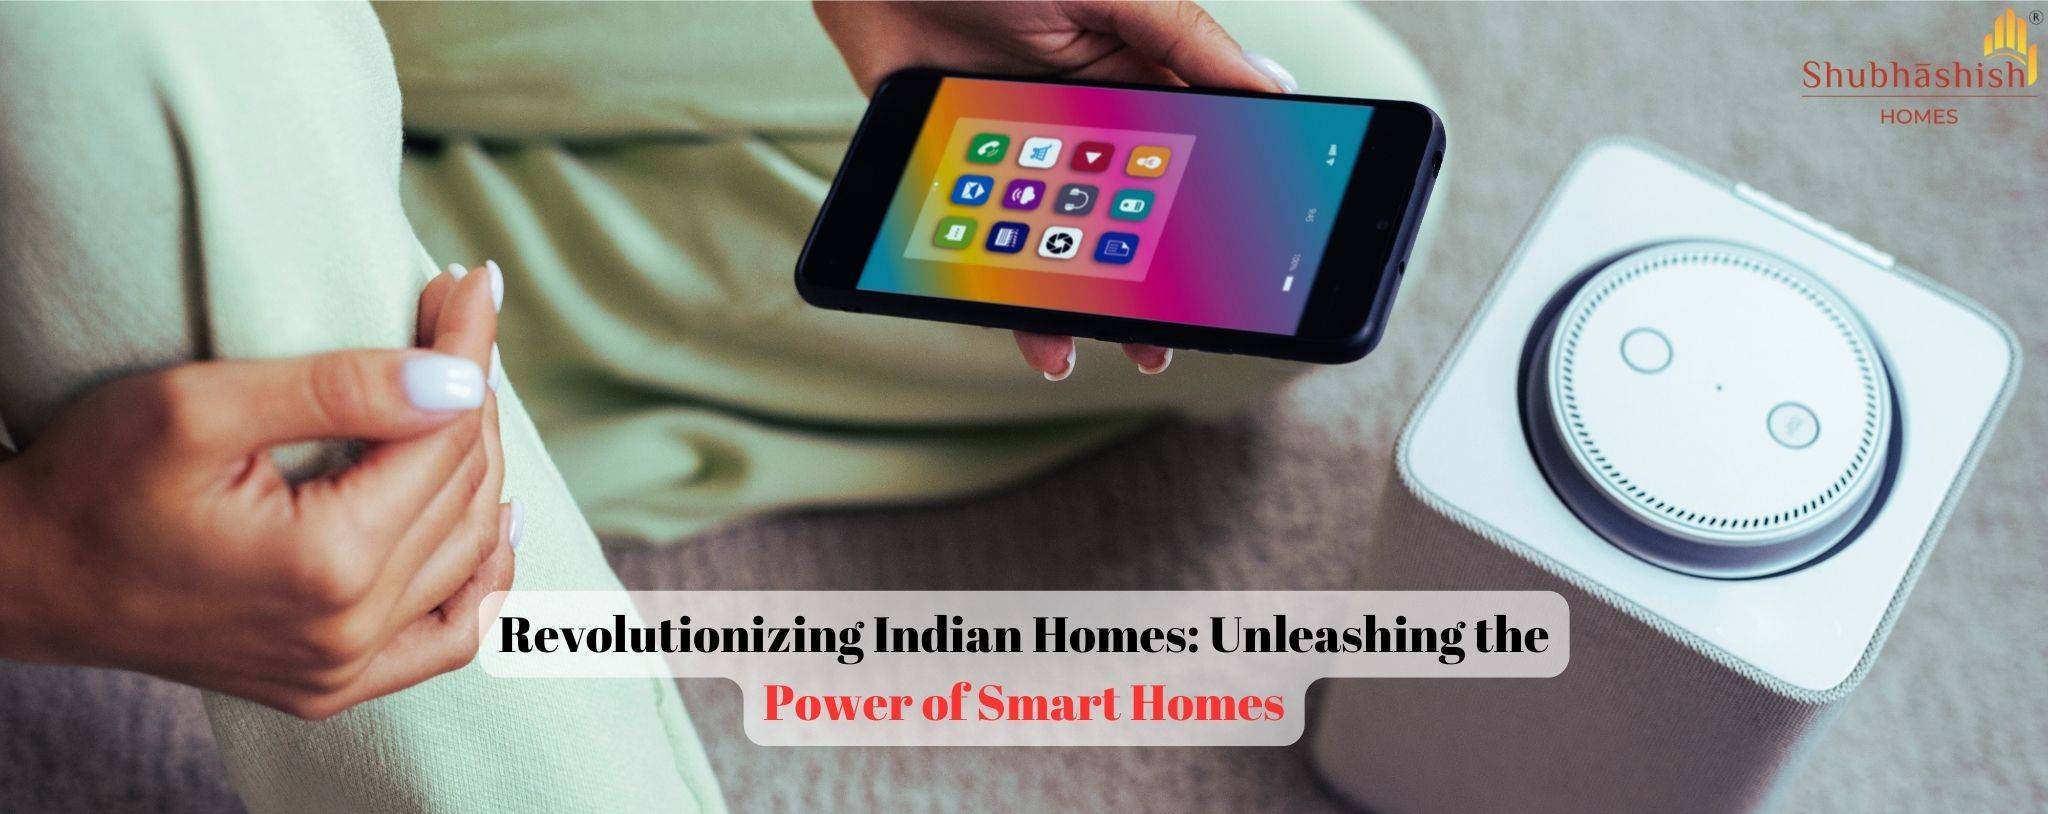 Revolutionizing Indian Homes: Unleashing the Power of Smart Homes